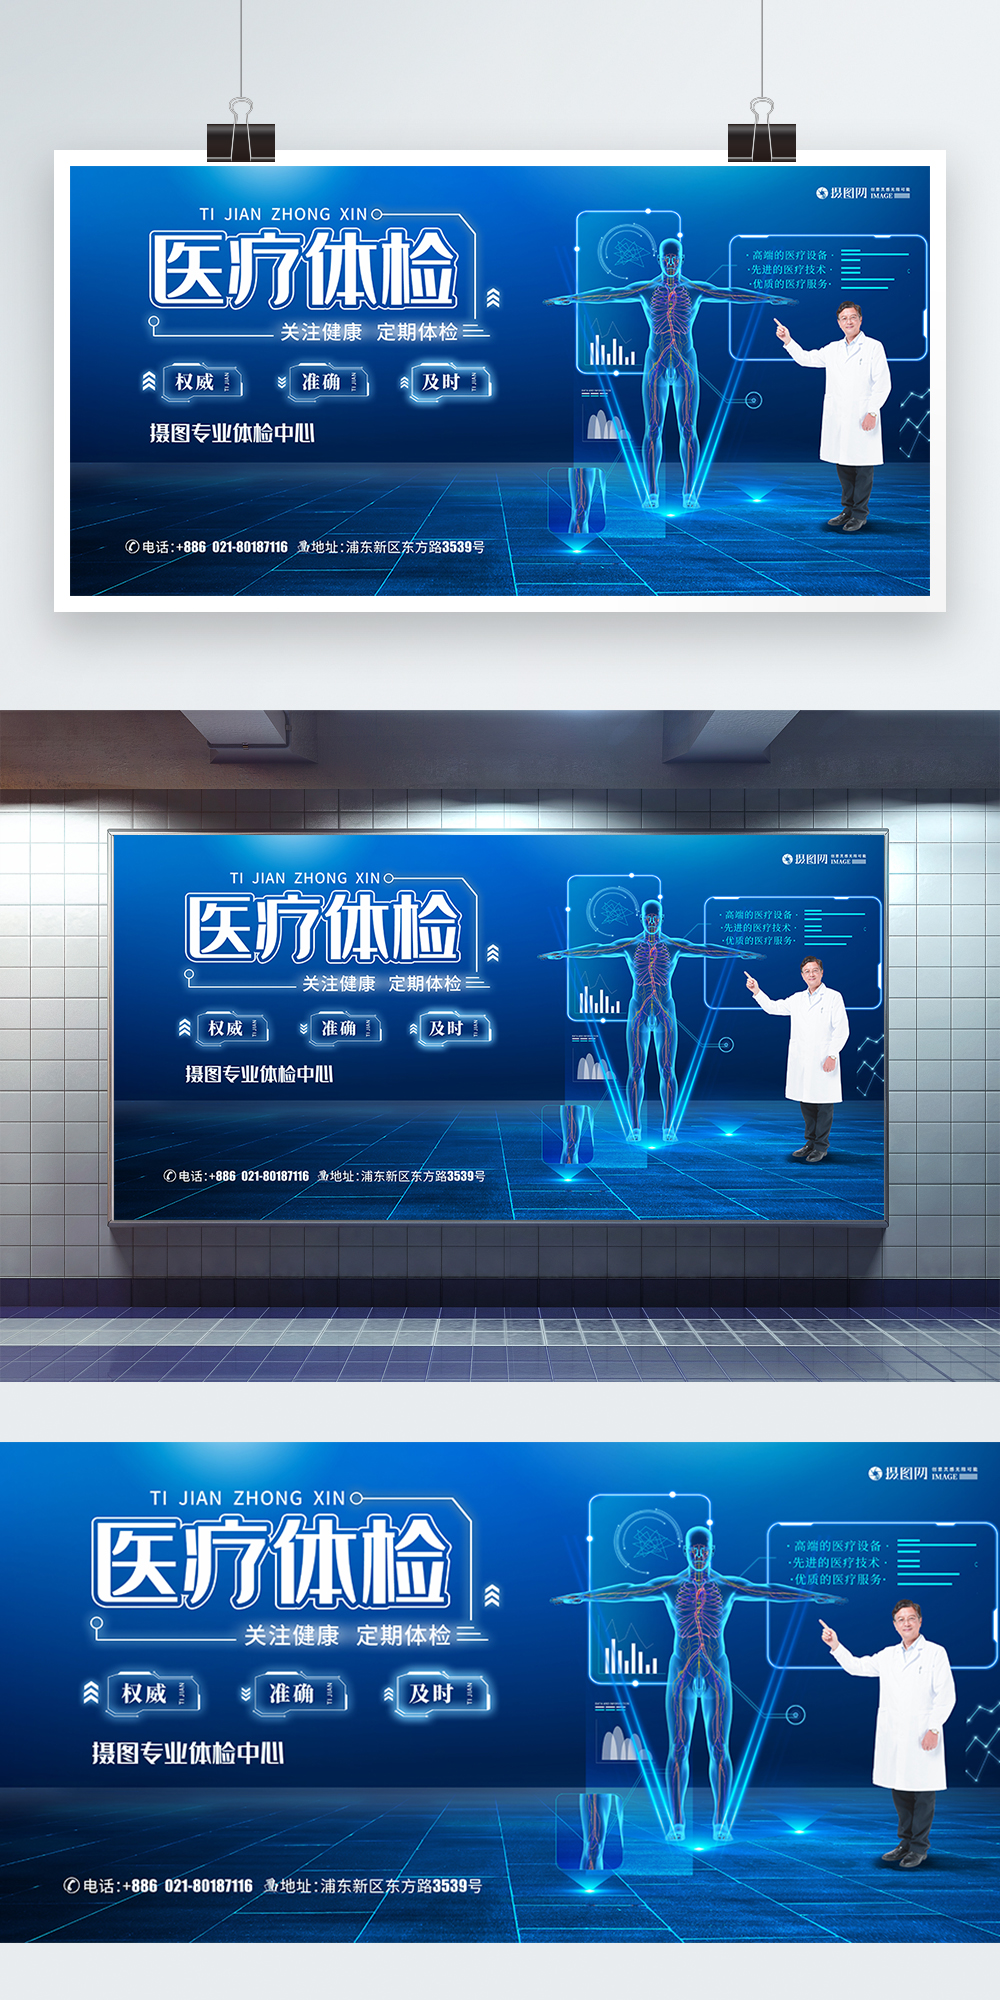 Hospital health checkup medical exhibition board template image_picture